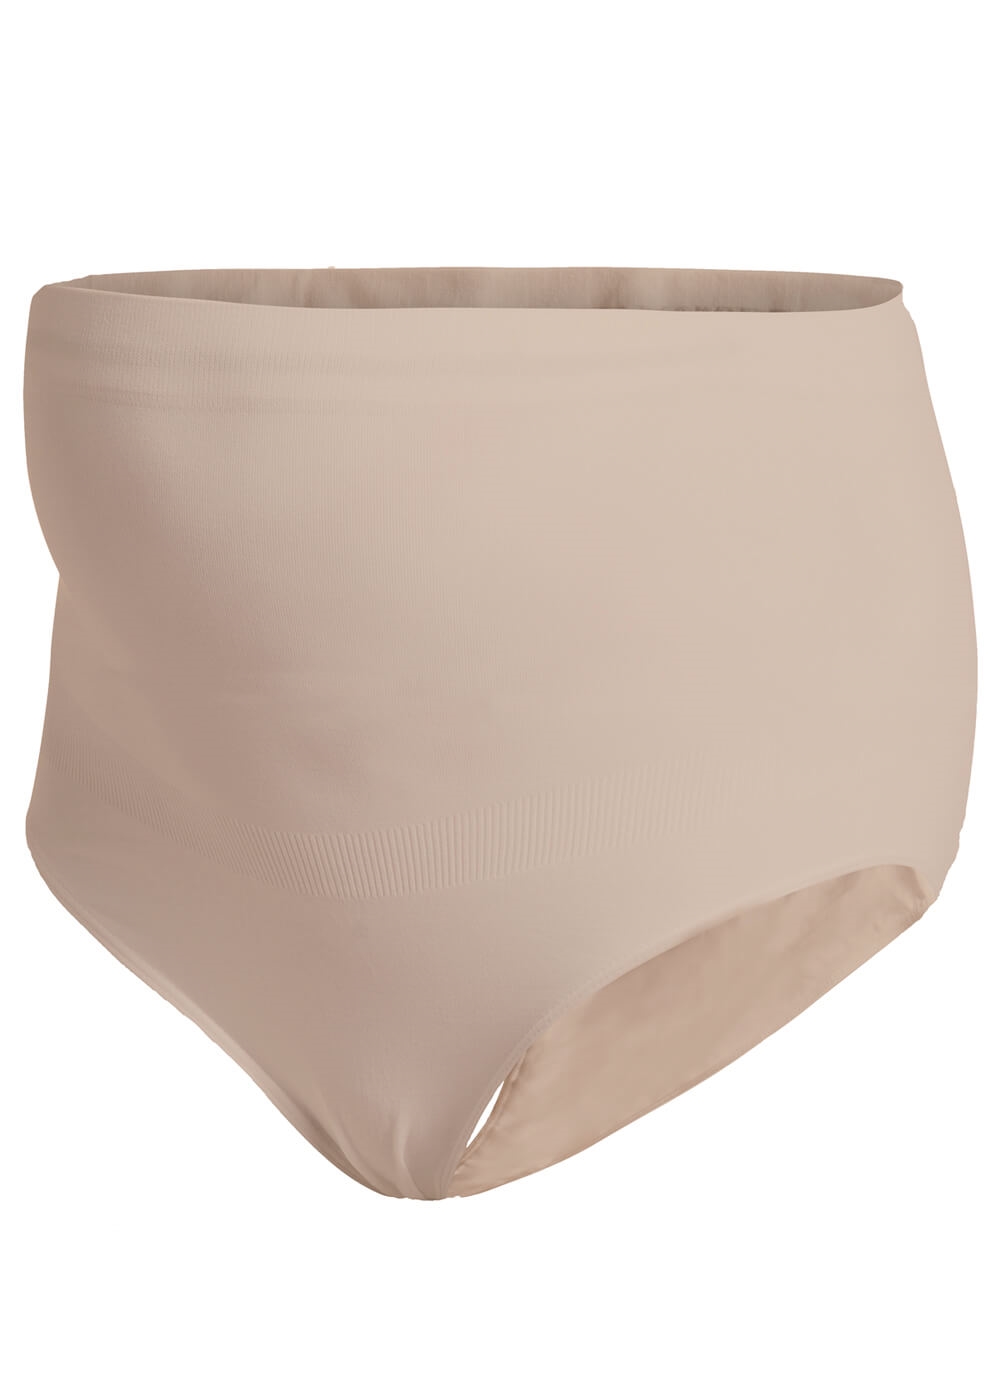 Seamless Over Belly Maternity Briefs in Nude by Noppies